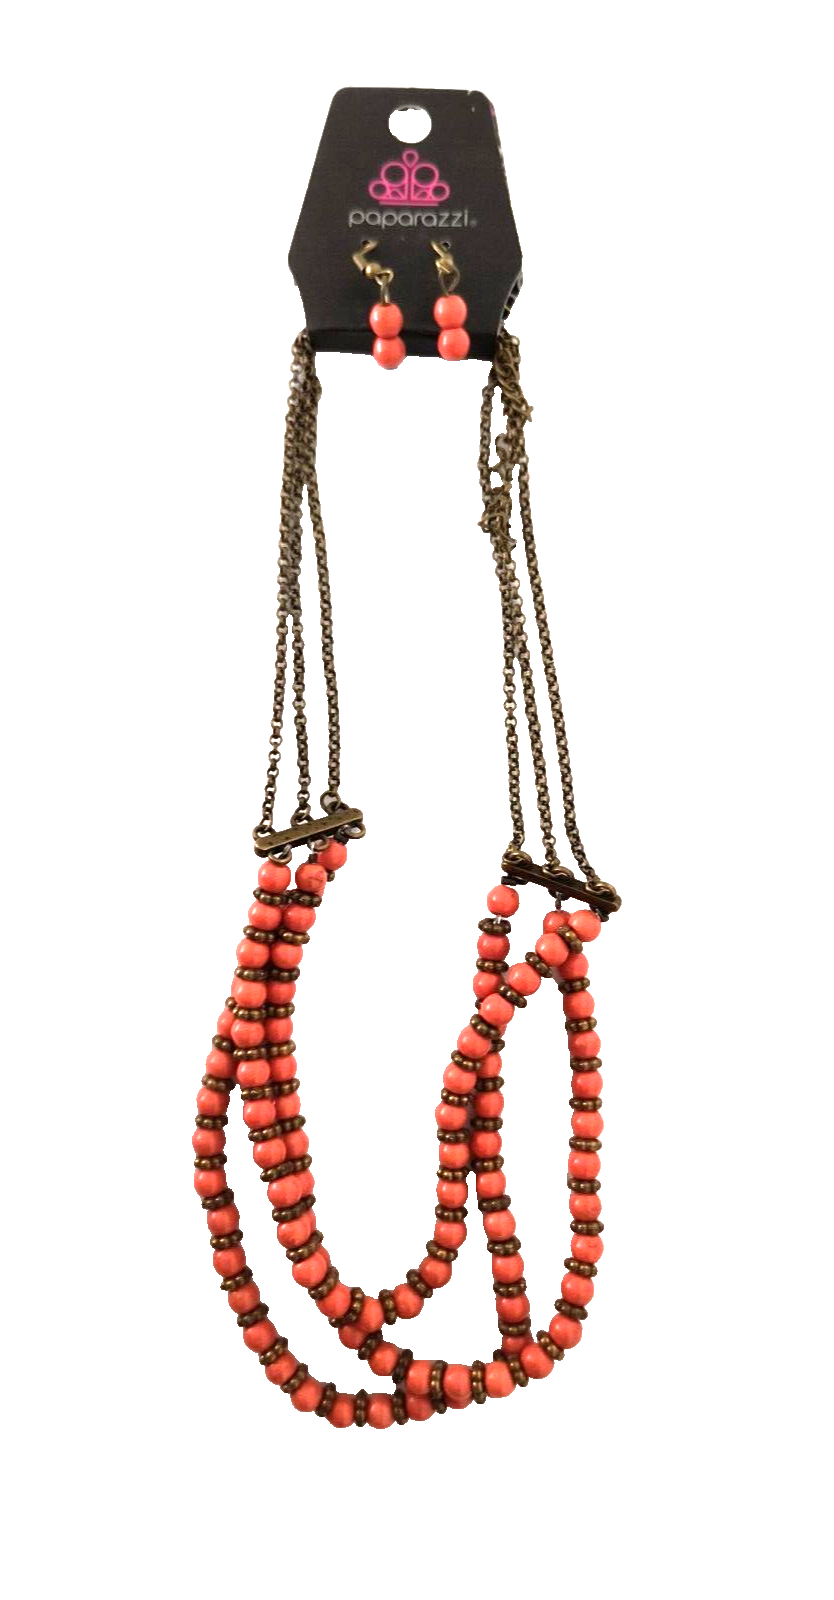 Paparazzi Necklace and Earring Set Coral Beads Bronze Color Spacers and Chains - $7.43